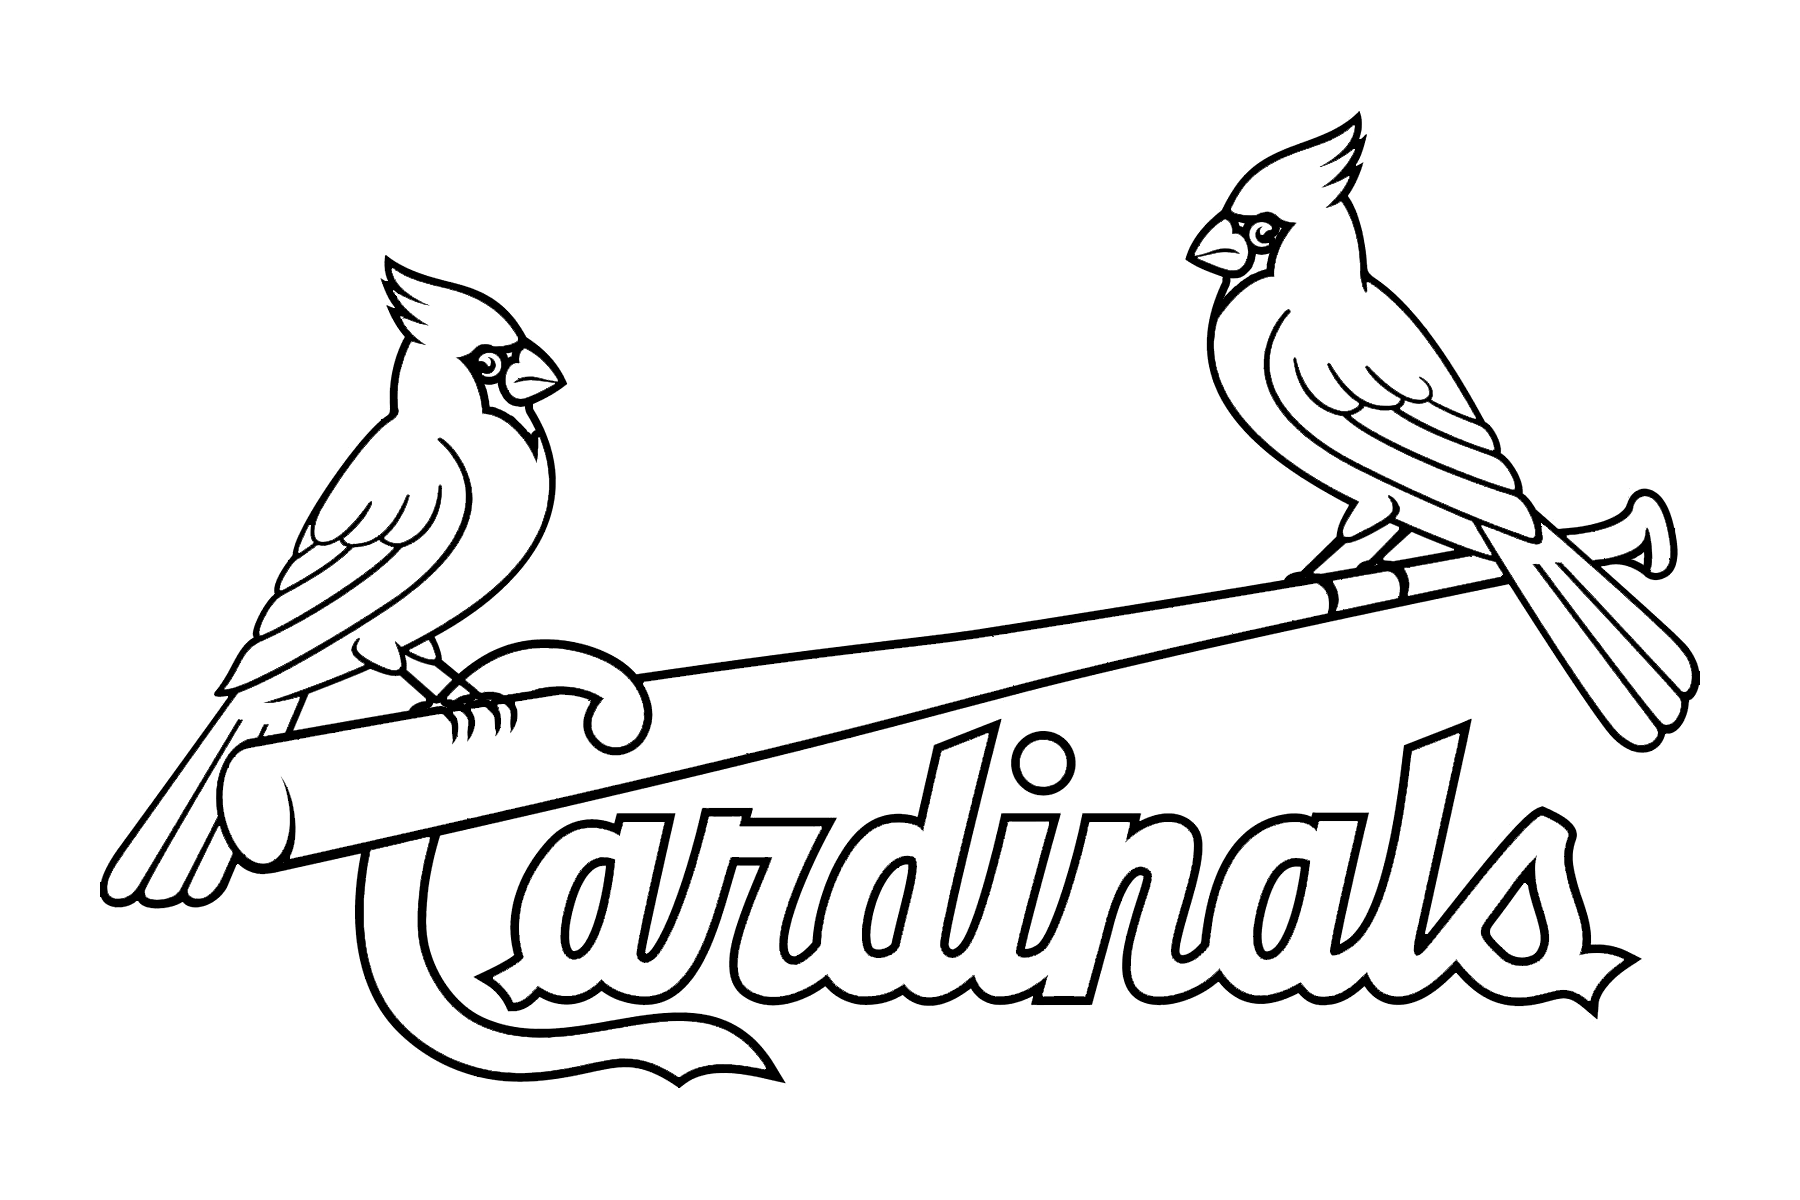 Birds on a Bat: The Evolution of the Cardinals Franchise Logo – TOKY